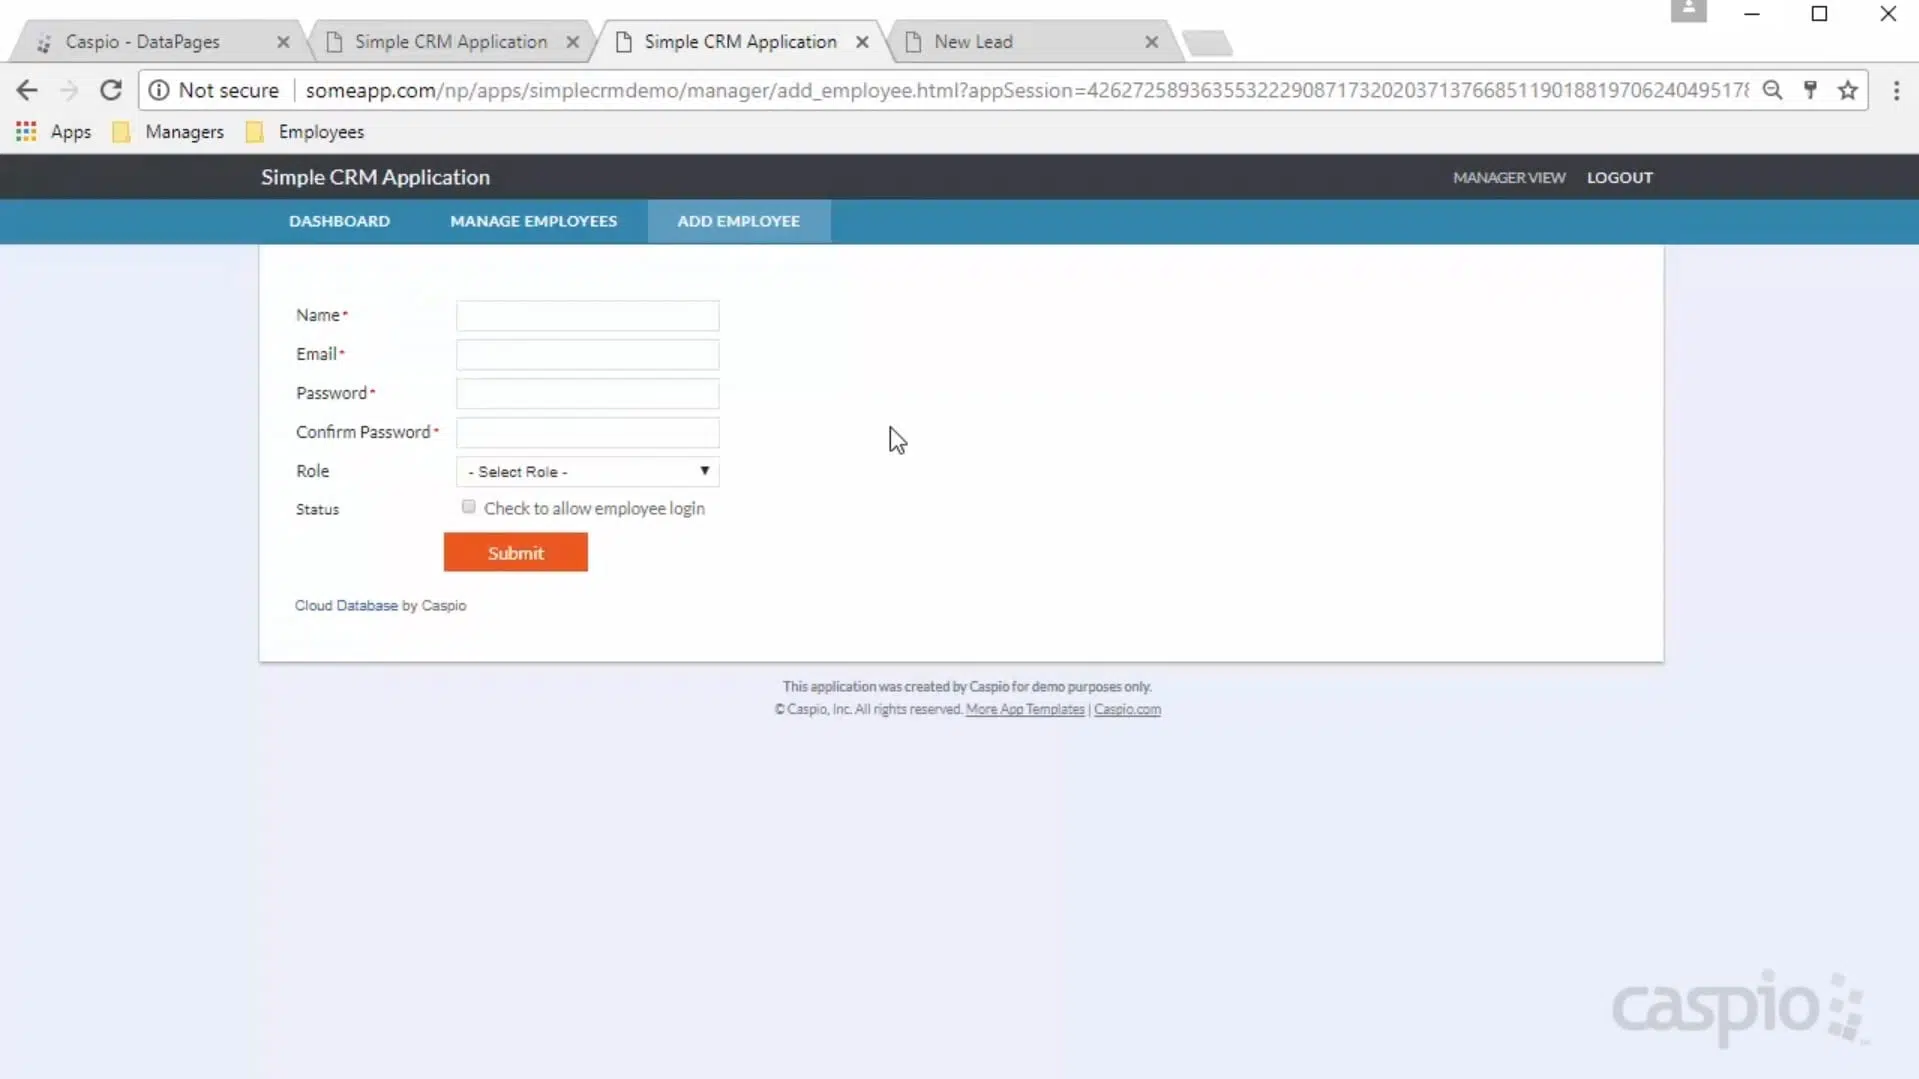 Screenshot of a sample CRM application designed on Caspio. It shows an “Add Employee” interface, featuring a form.